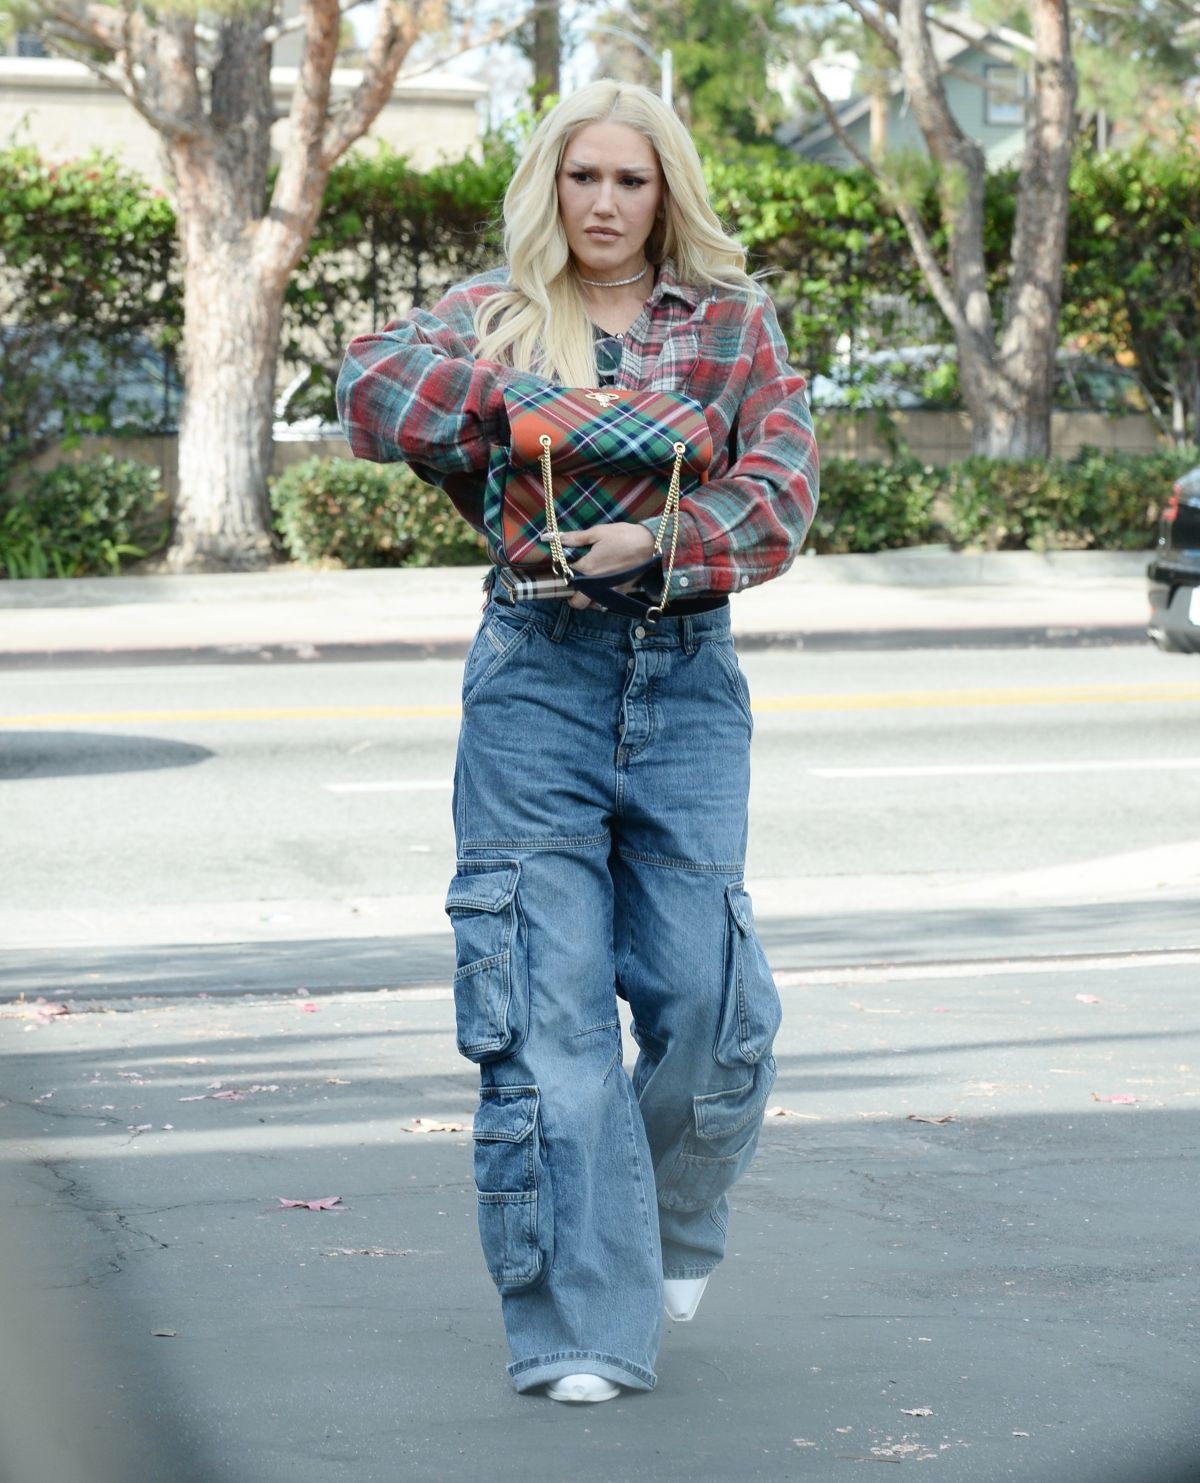 Gwen Stefani in Casual Checked Shirt and Denim in Los Angeles 3